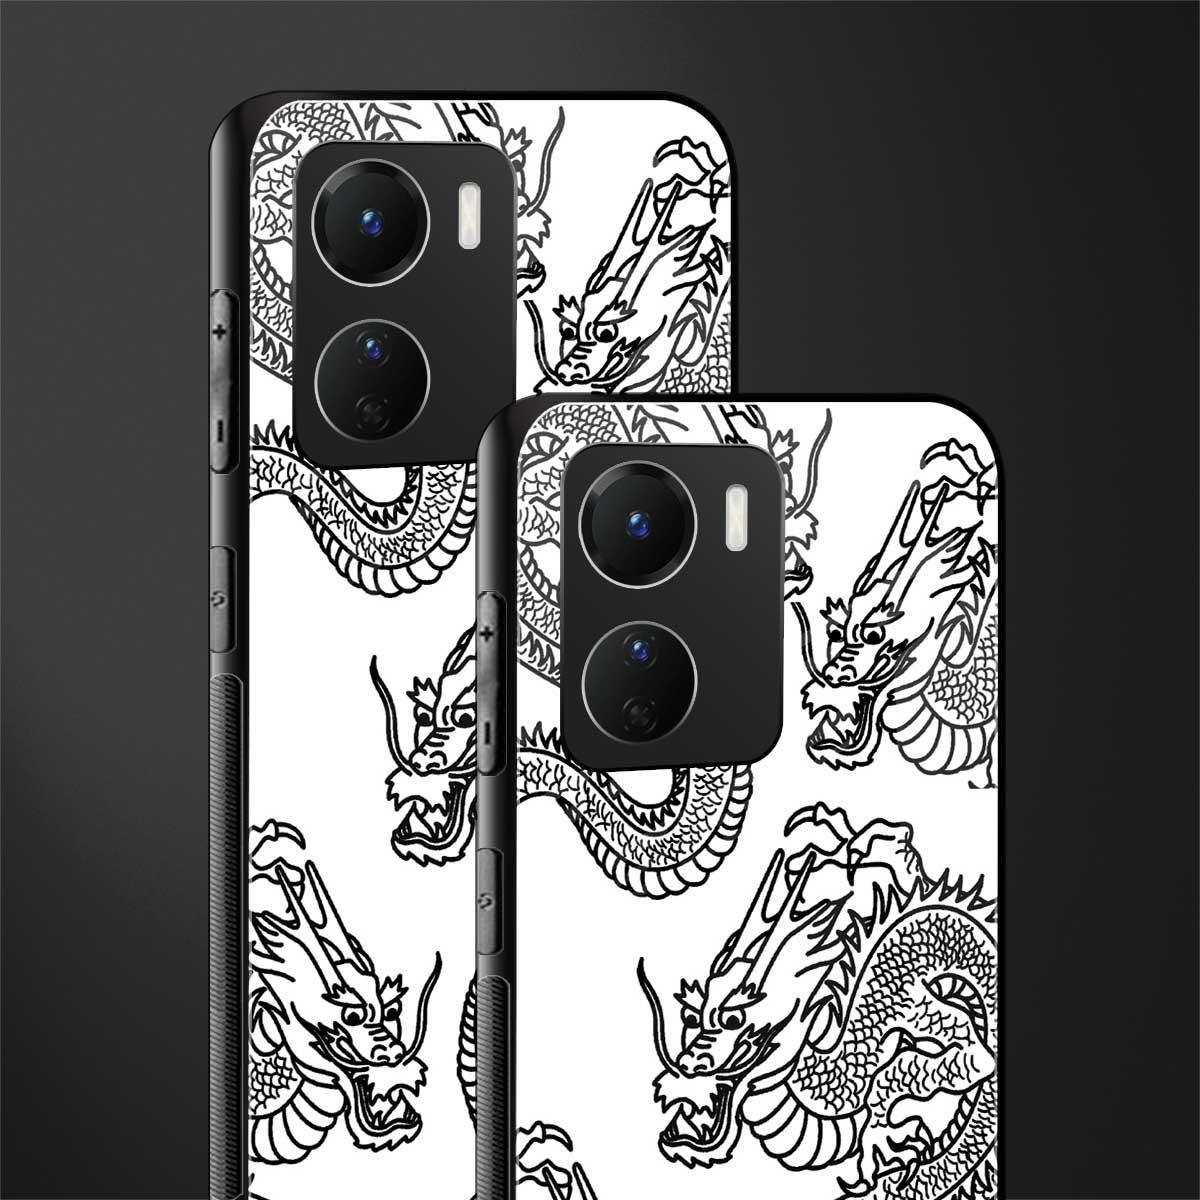 dragons lite back phone cover | glass case for vivo y16